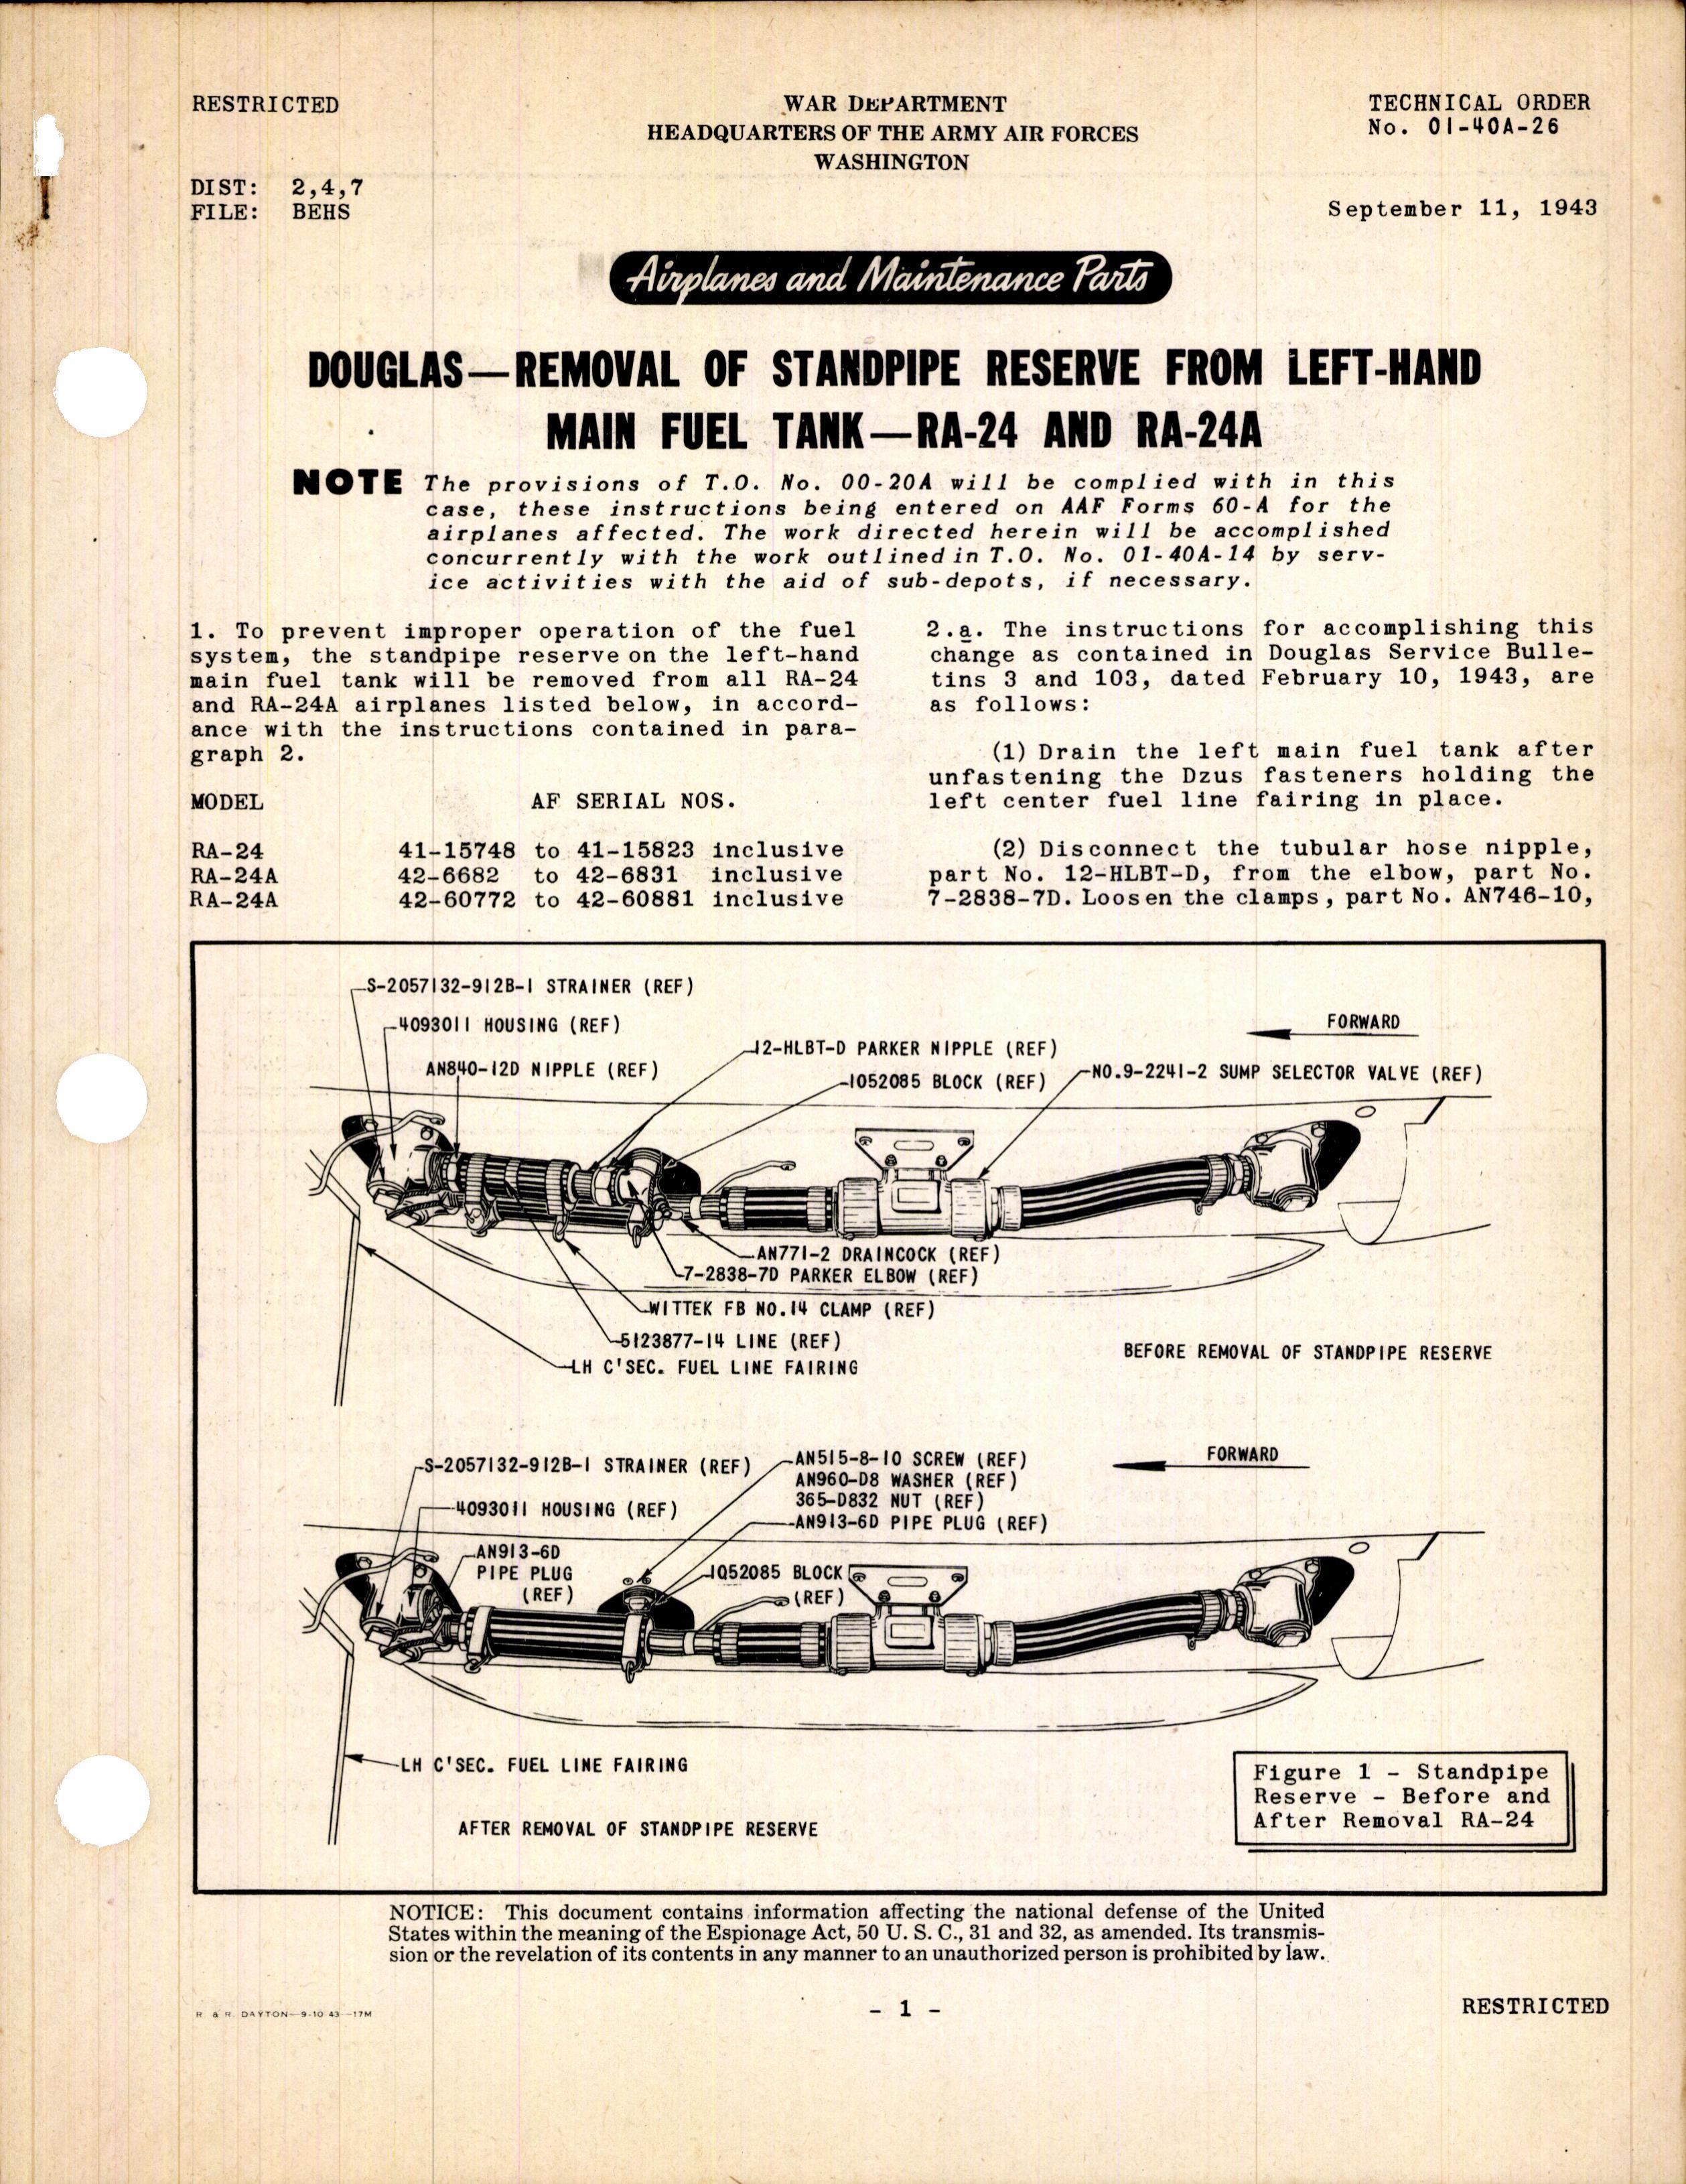 Sample page 1 from AirCorps Library document: Removal of Standpipe Reserve From Left-Hand Main Fuel Tank for RA-24 and RA-24A